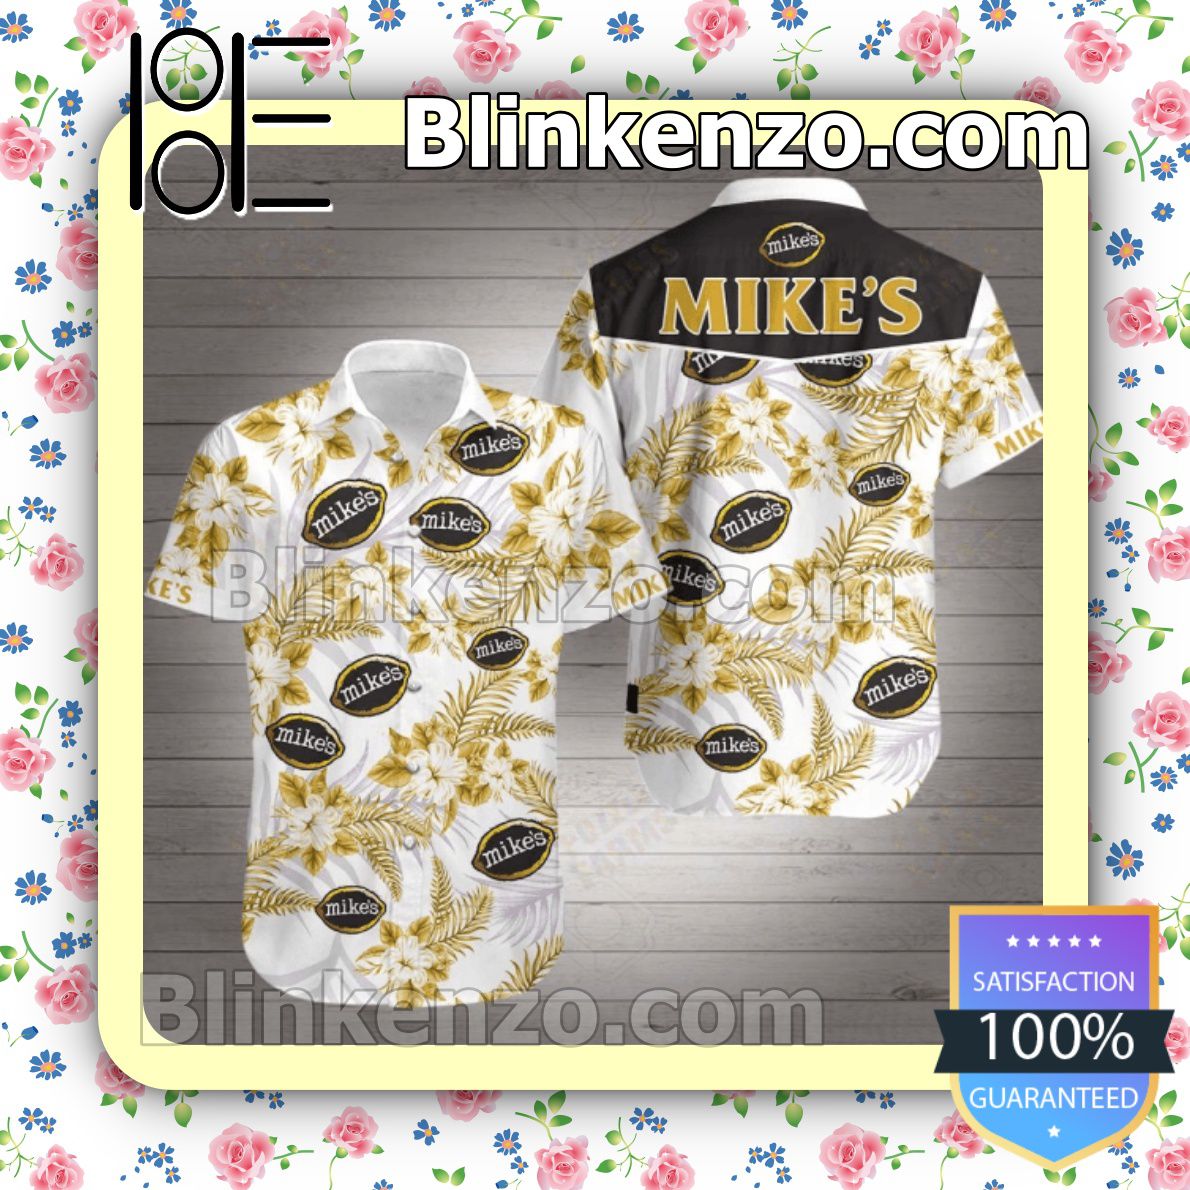 Where To Buy Mike's Yellow Tropical Floral White Summer Shirts